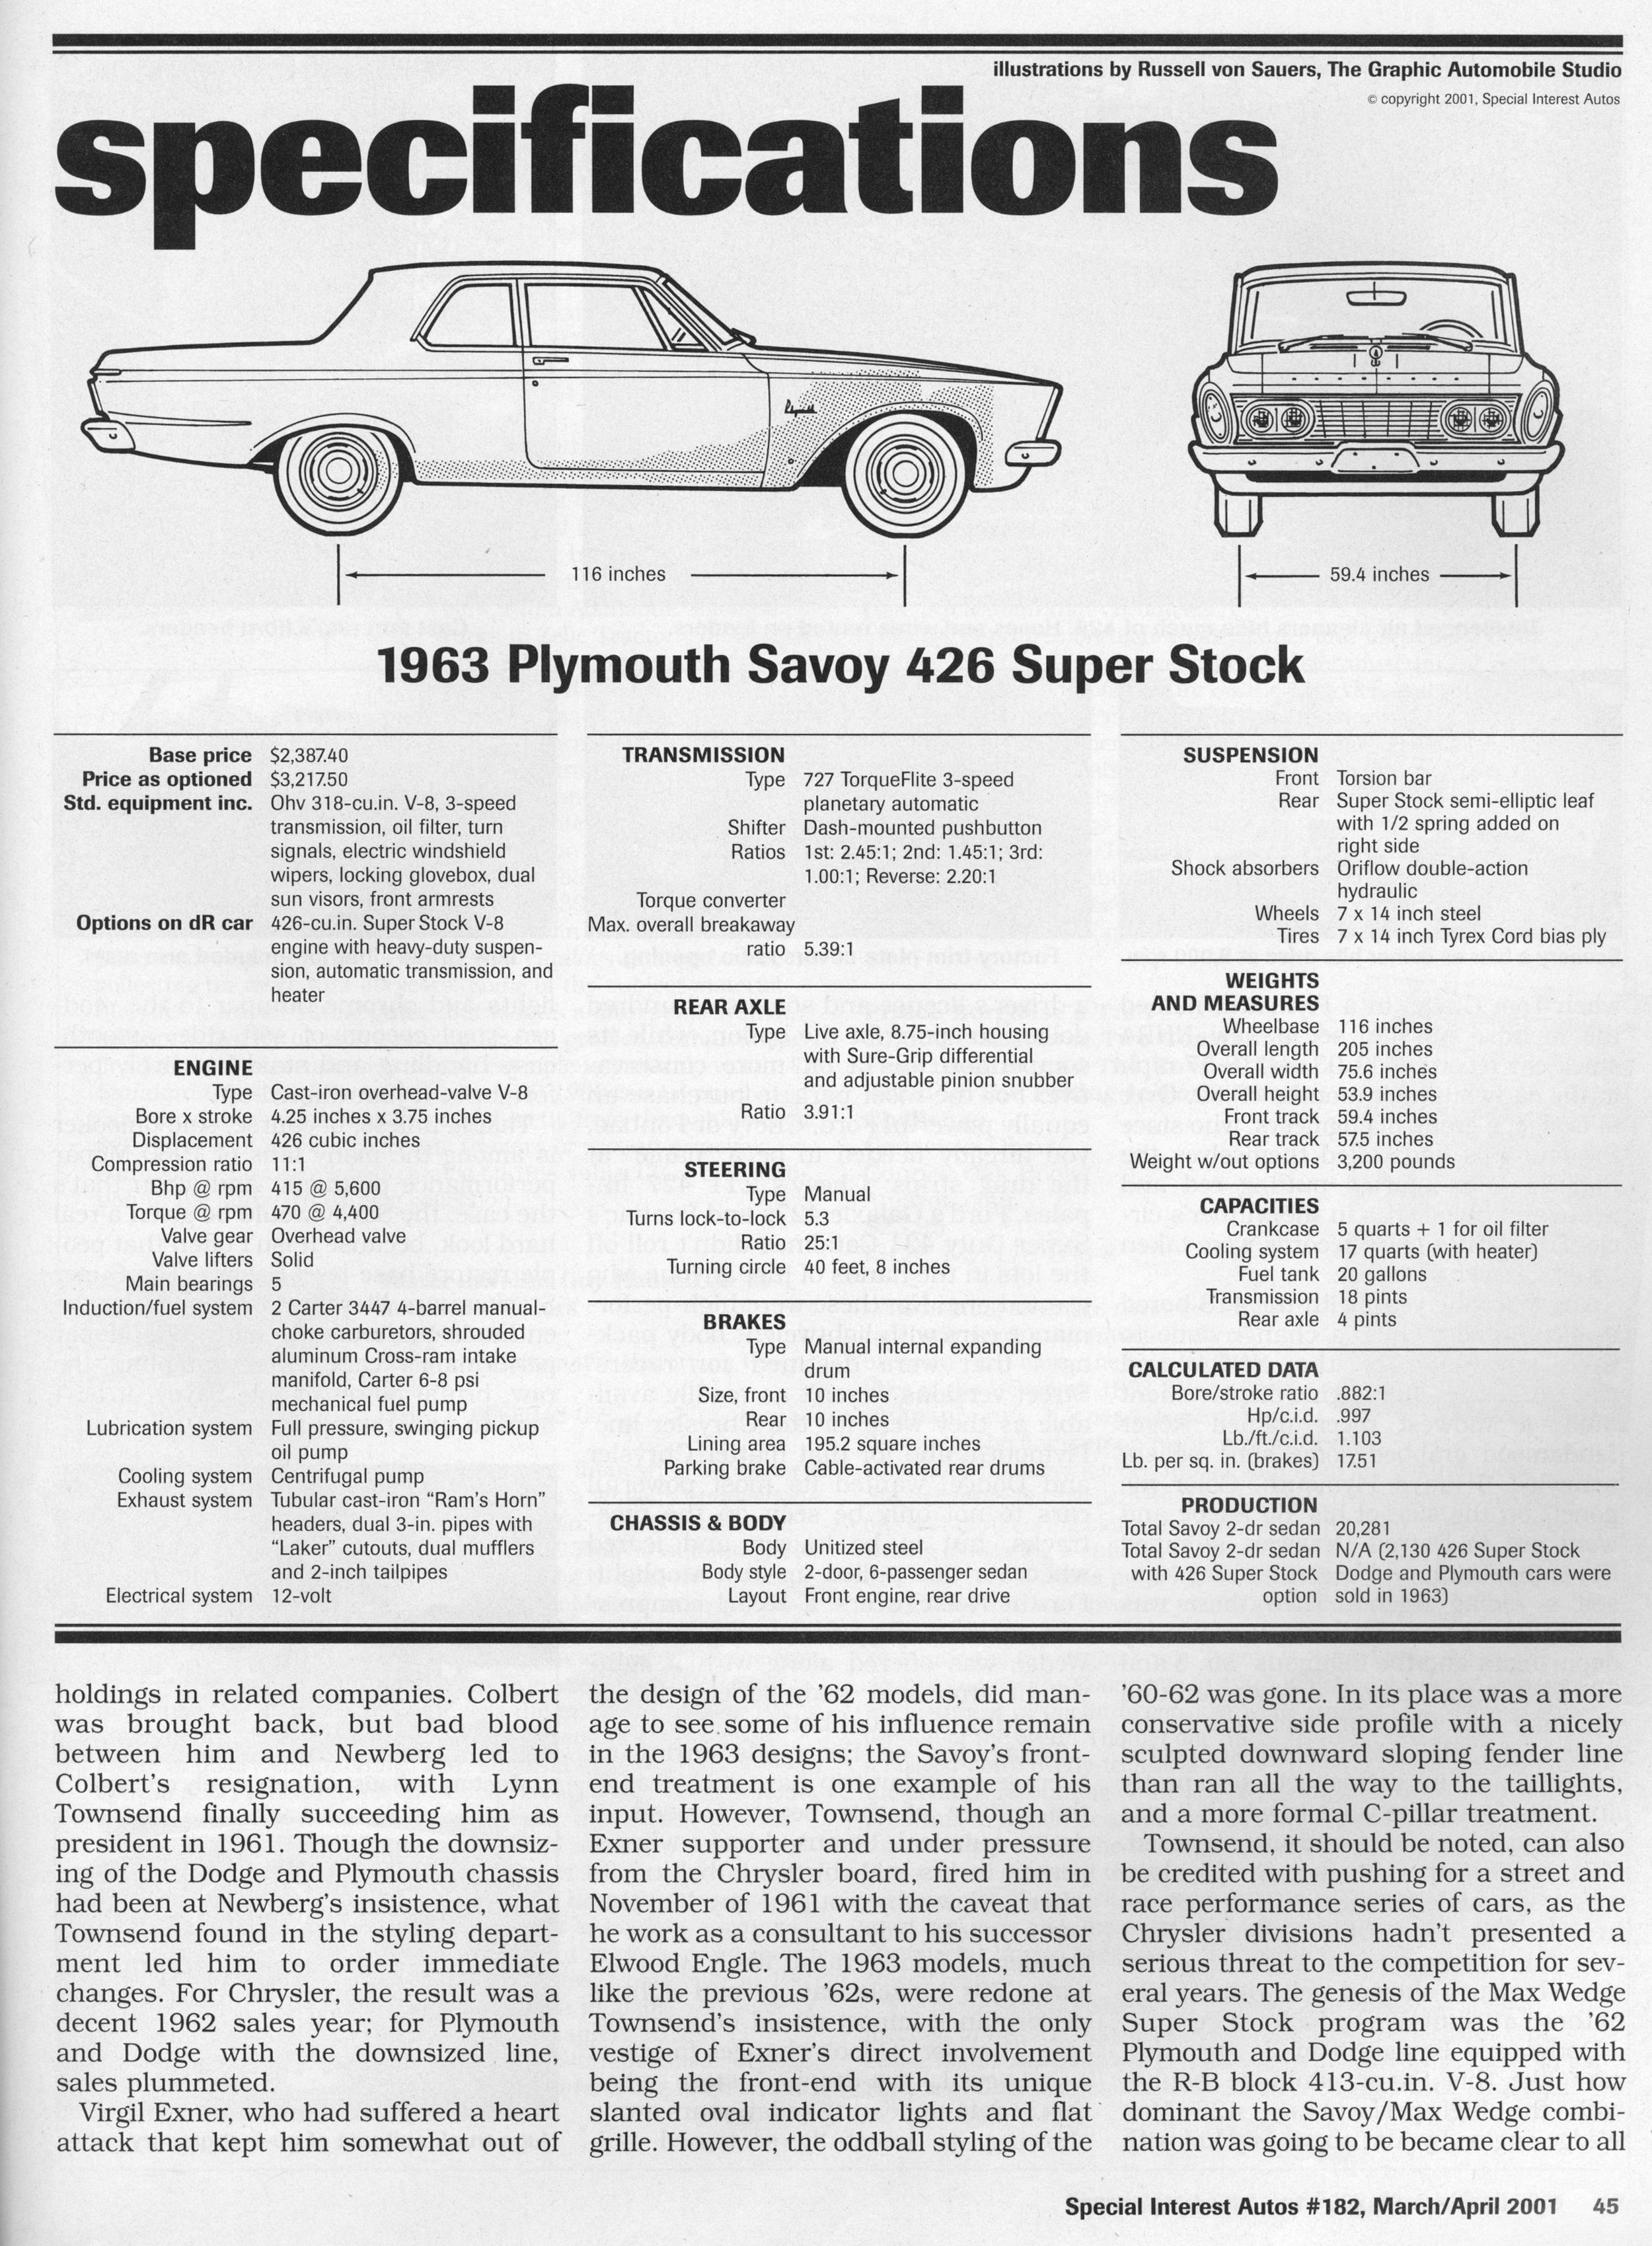 Plymouth Fleet Special #8